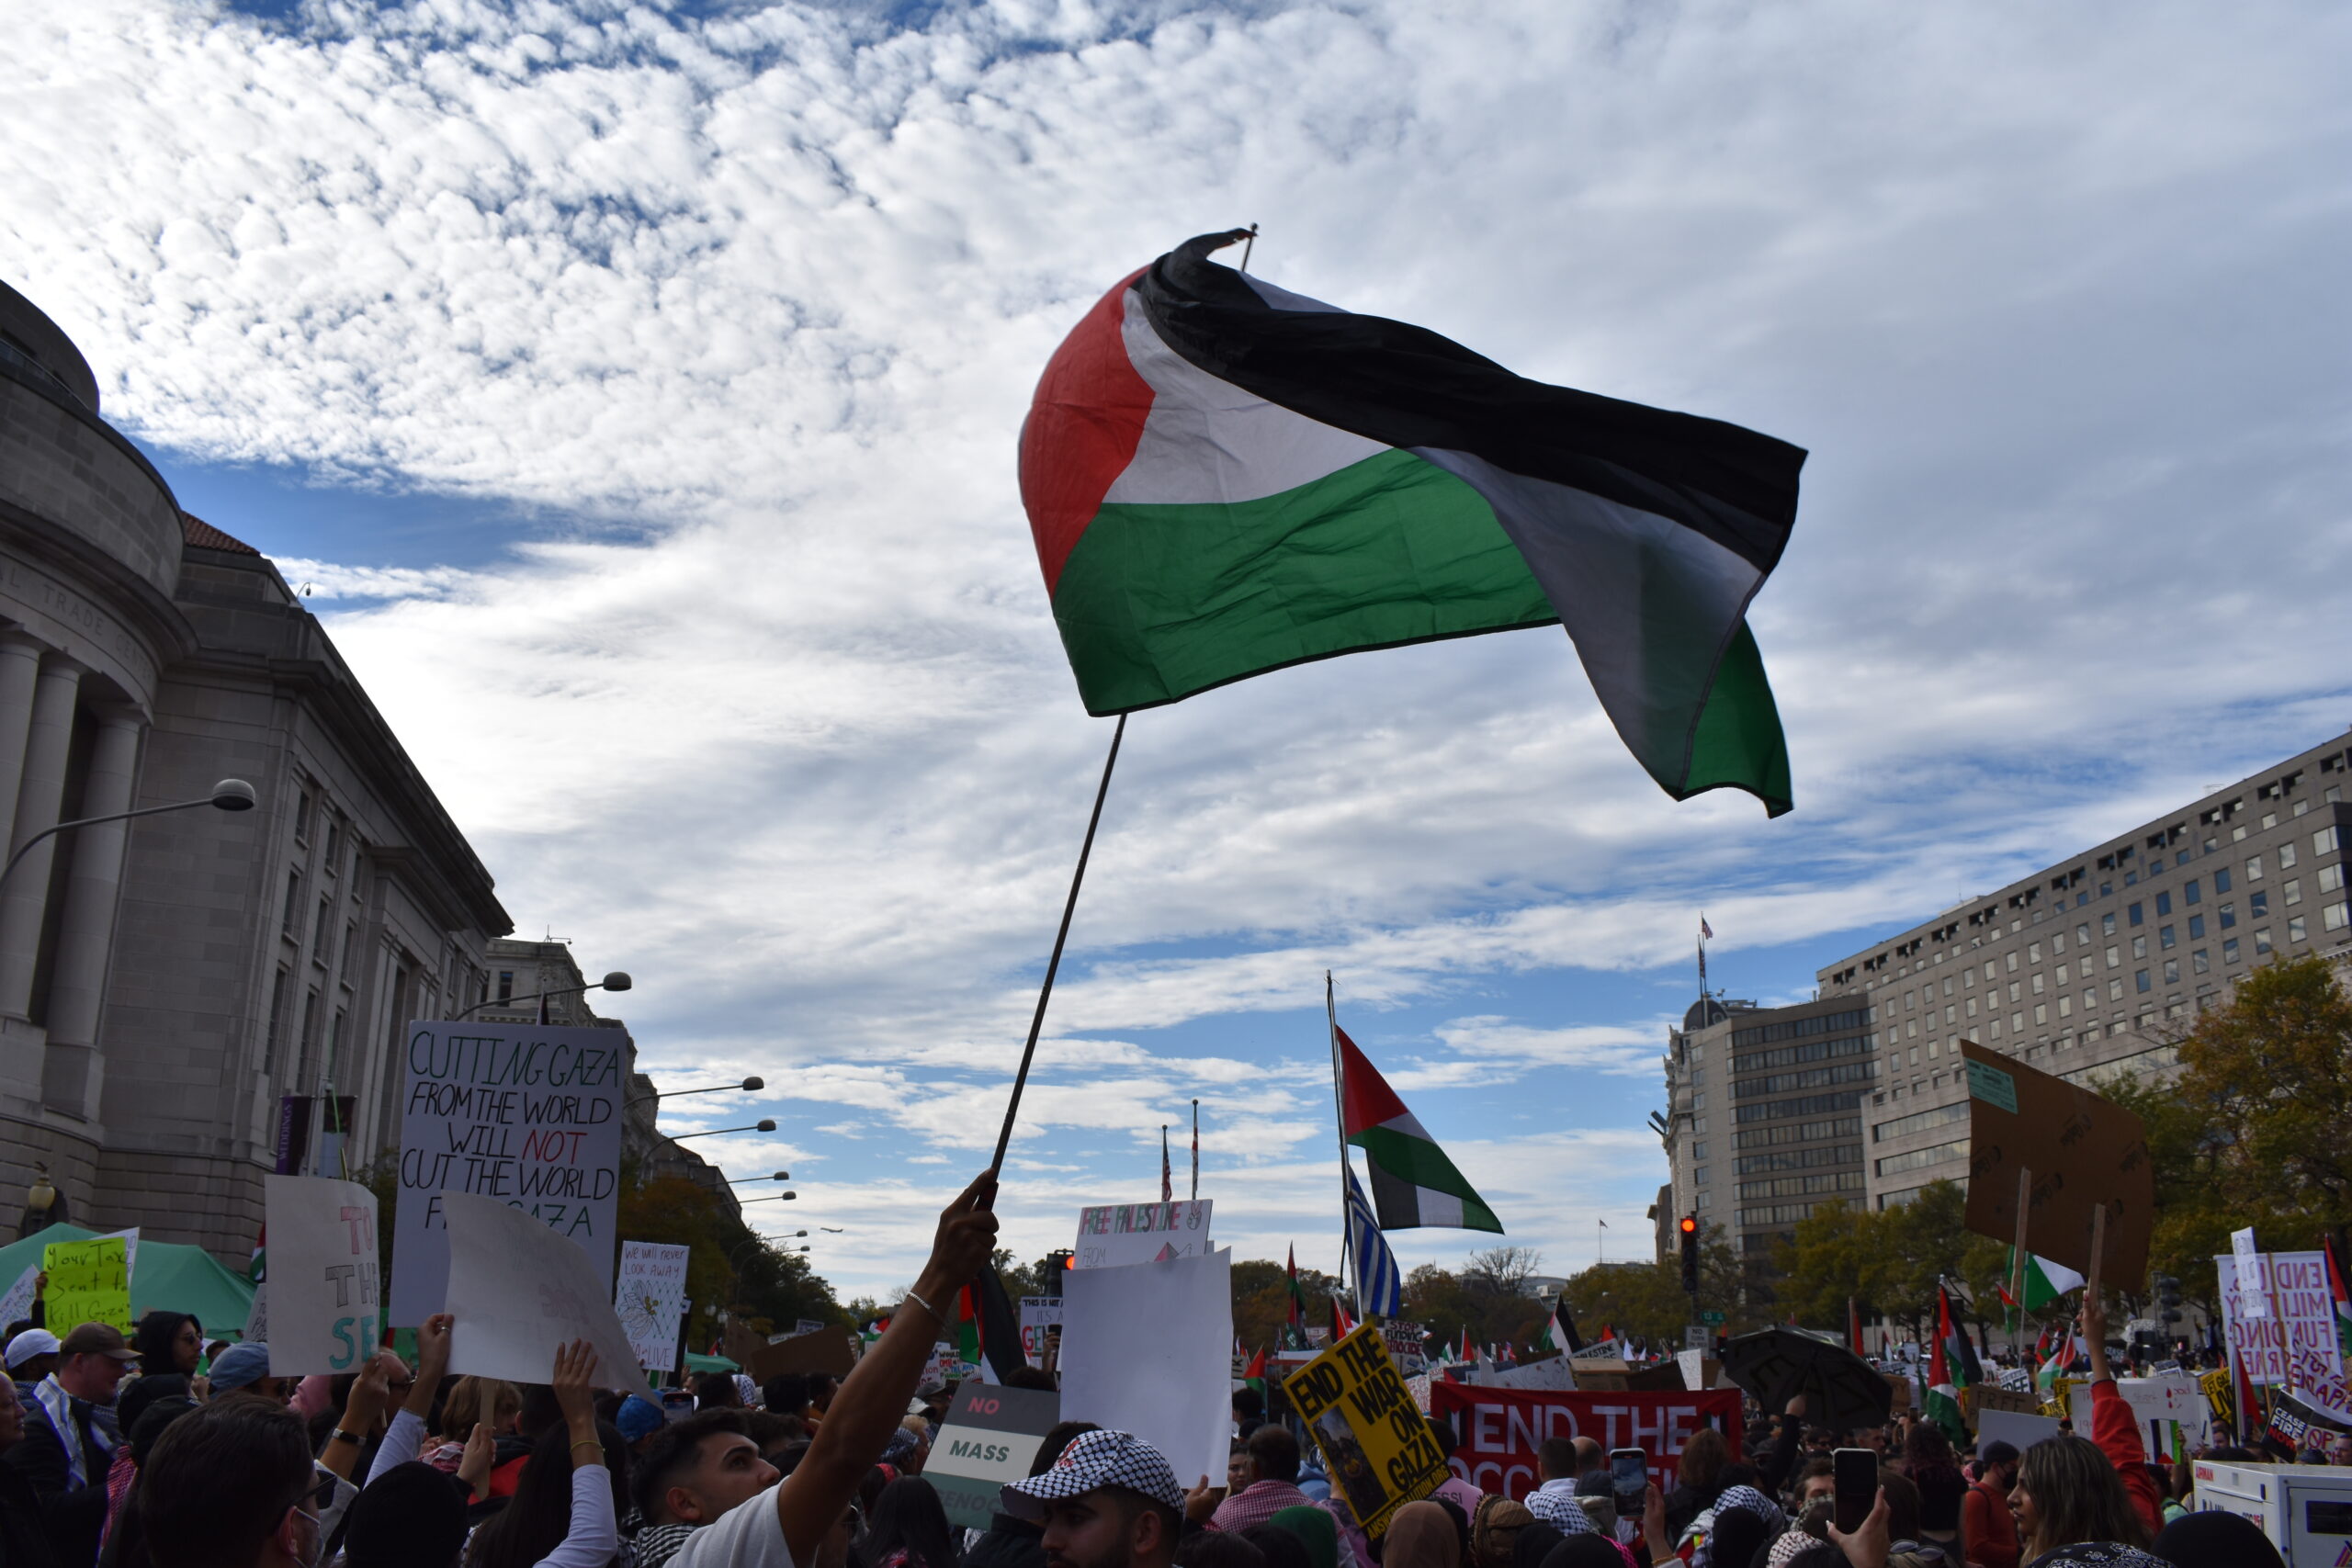 My Experience at the ‘Free Palestine’ March in D.C.